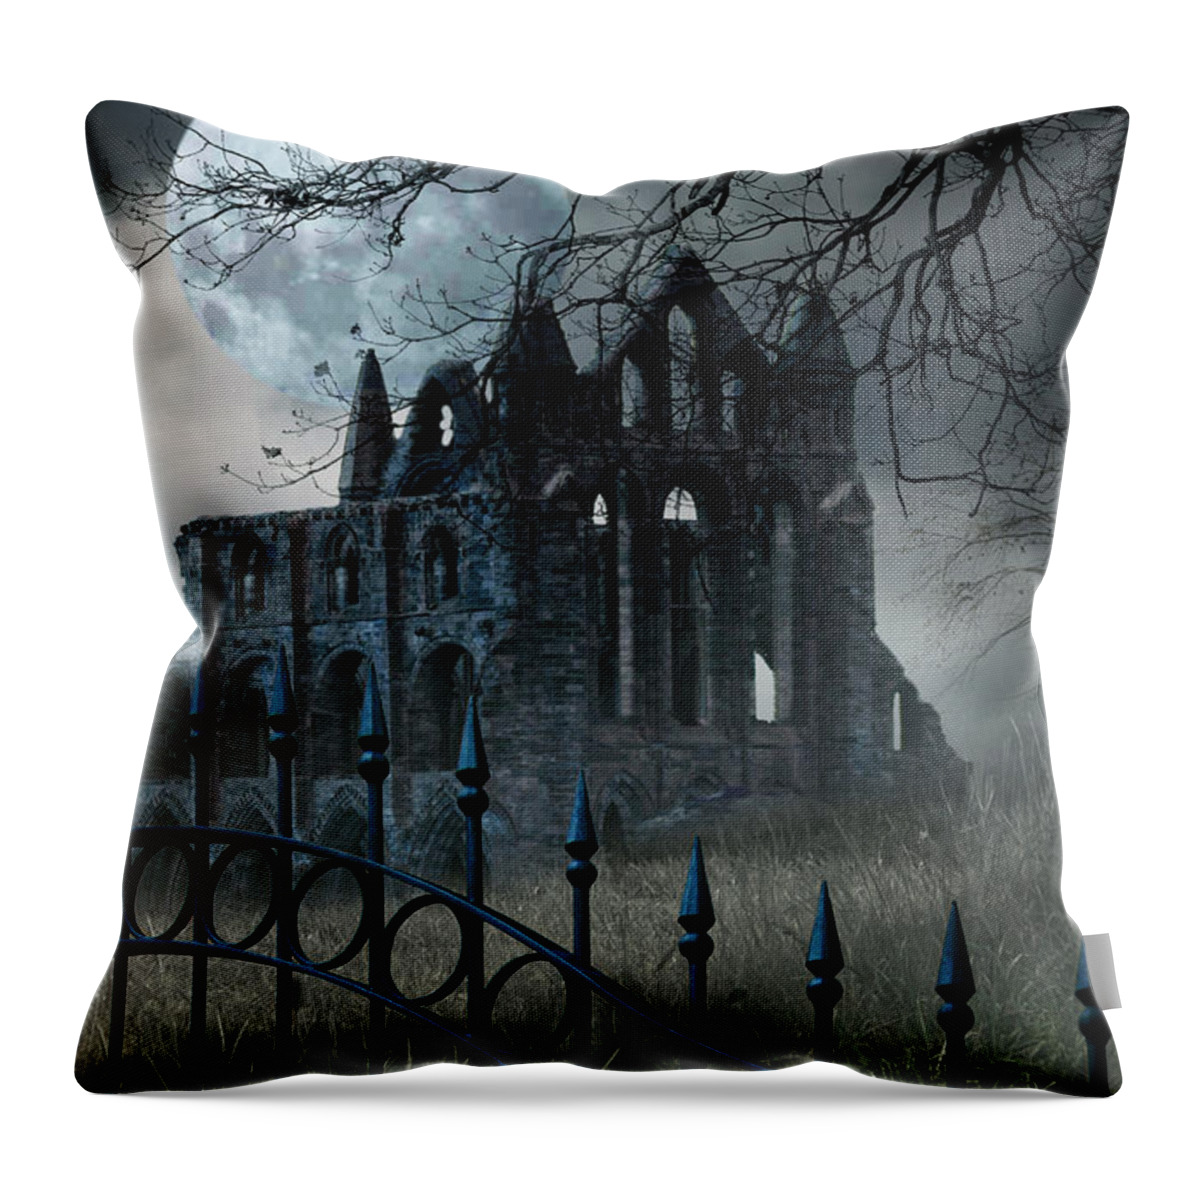 Abby Throw Pillow featuring the photograph An Old Haunted Abby In The Moonlight With A Fence by Ethiriel Photography